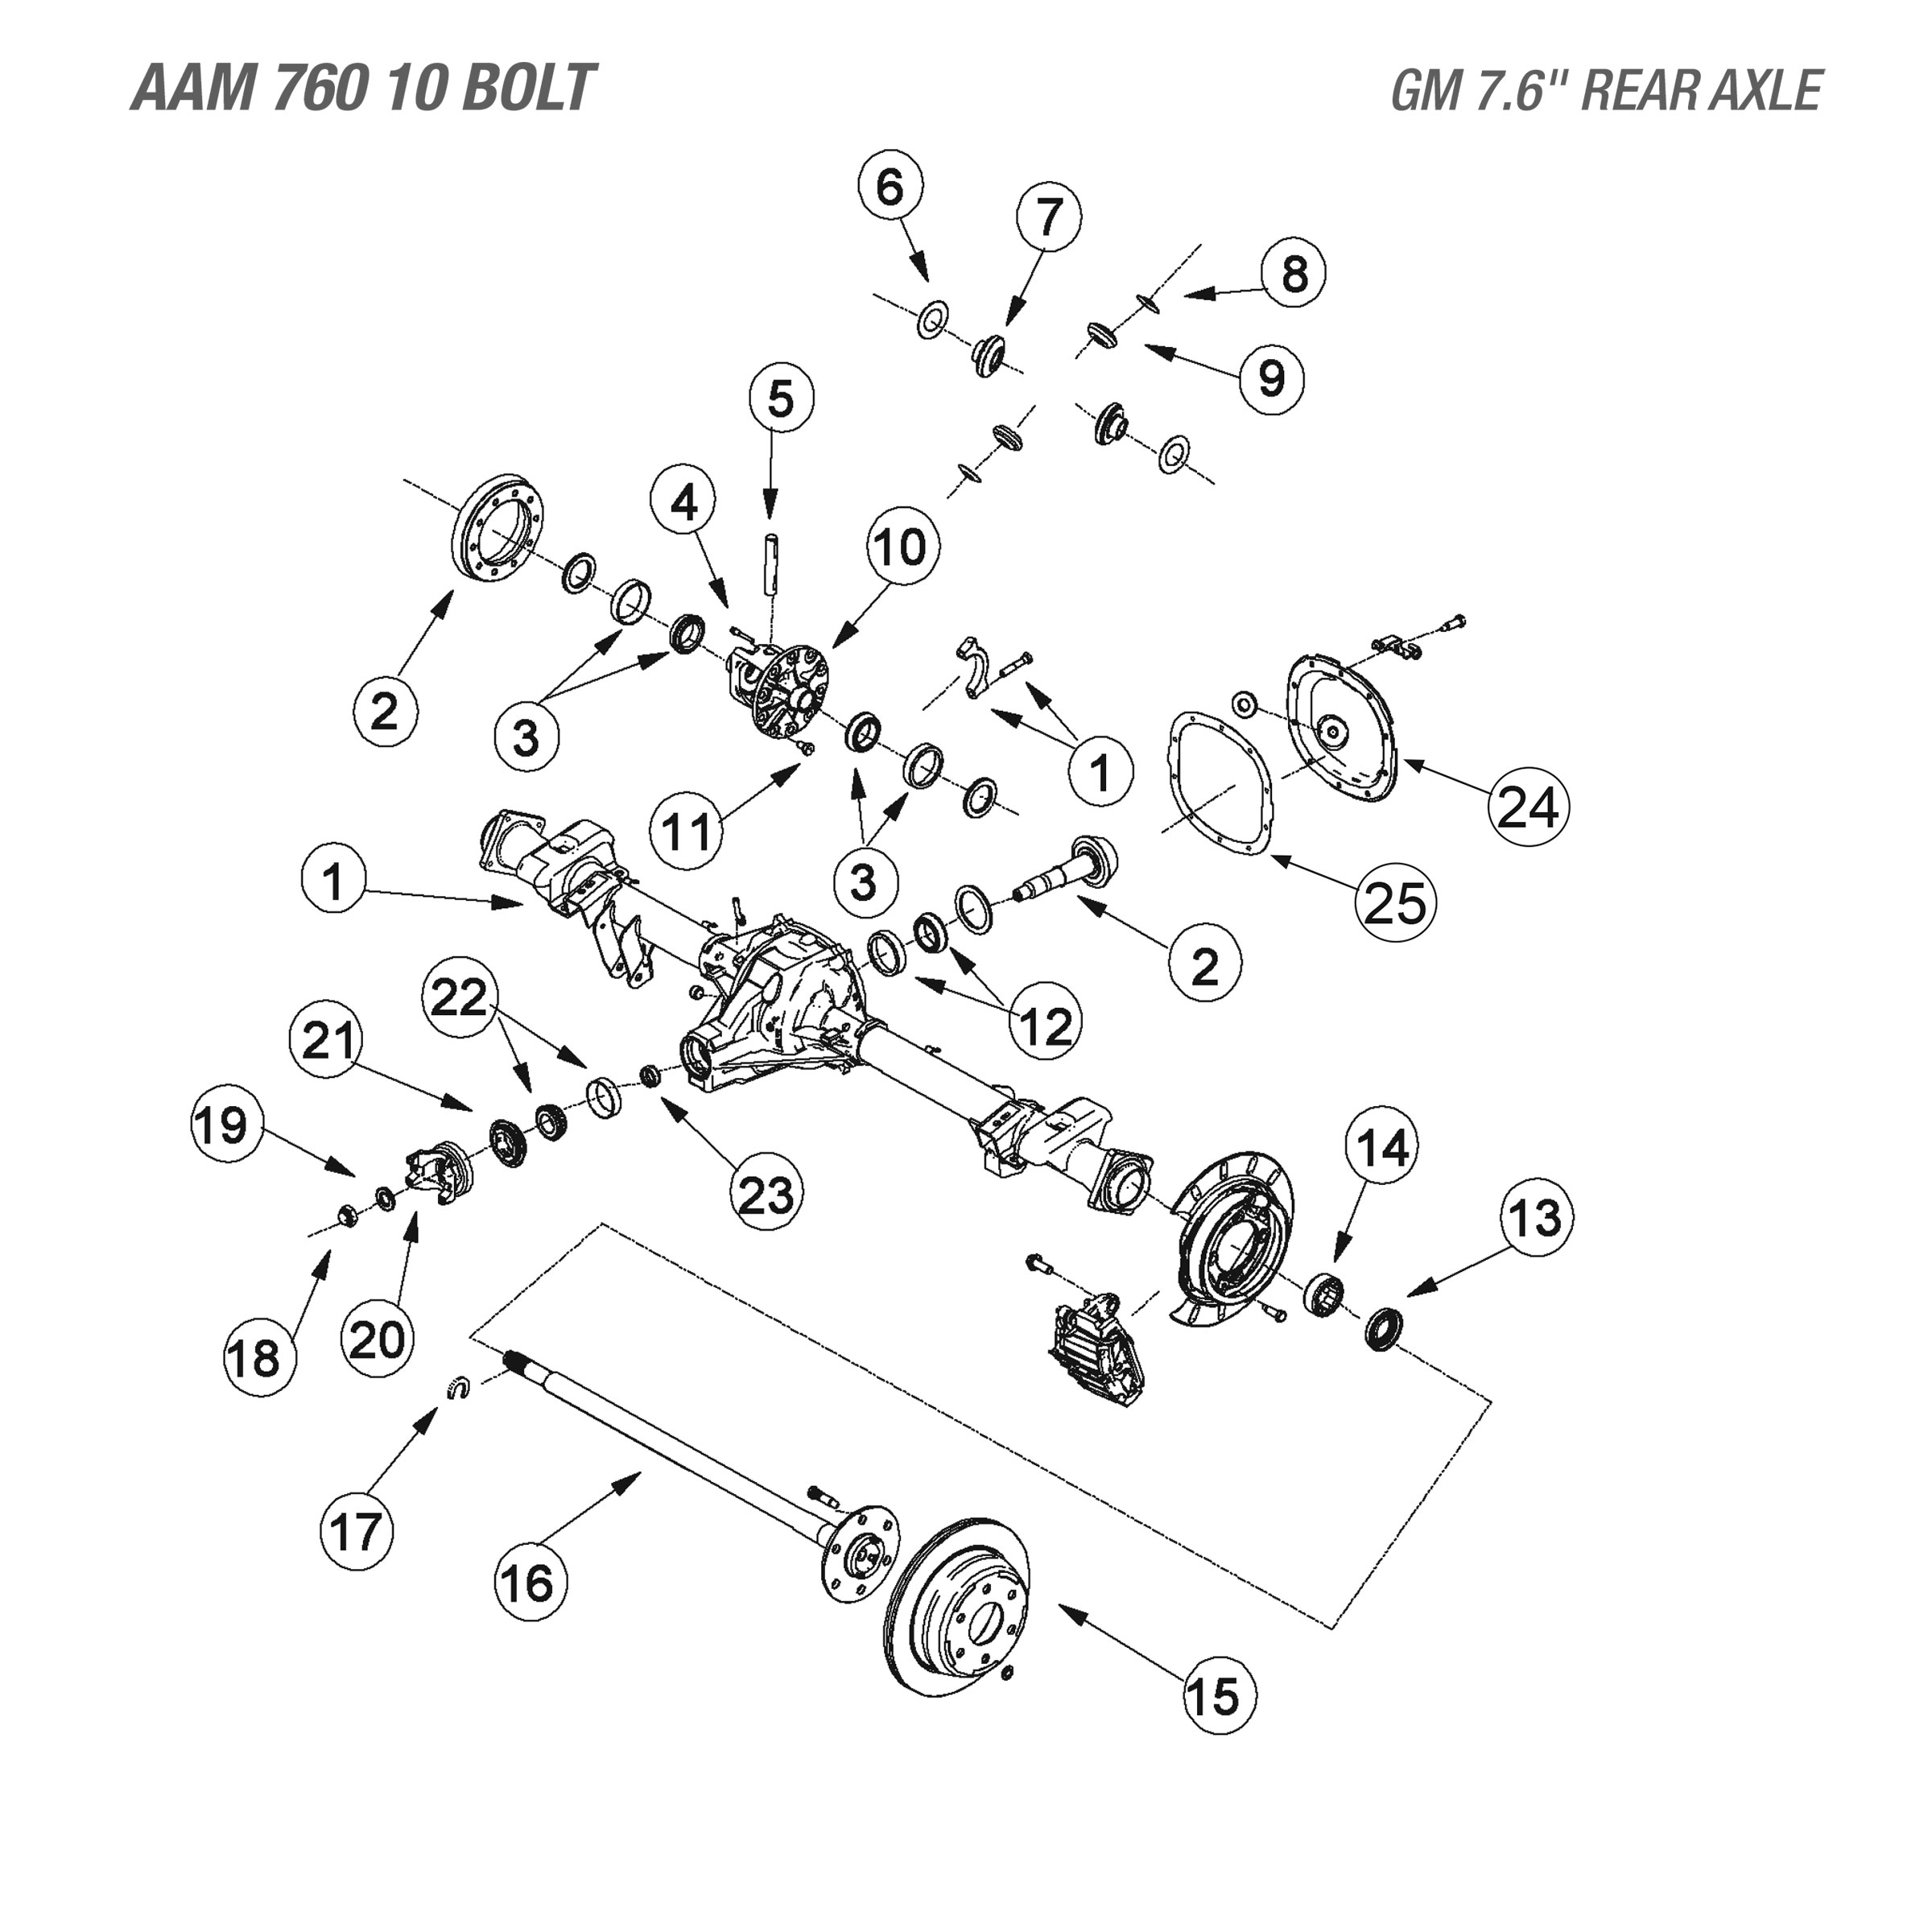 GM 7.5 and 7.6 Rear Axle Exploded View